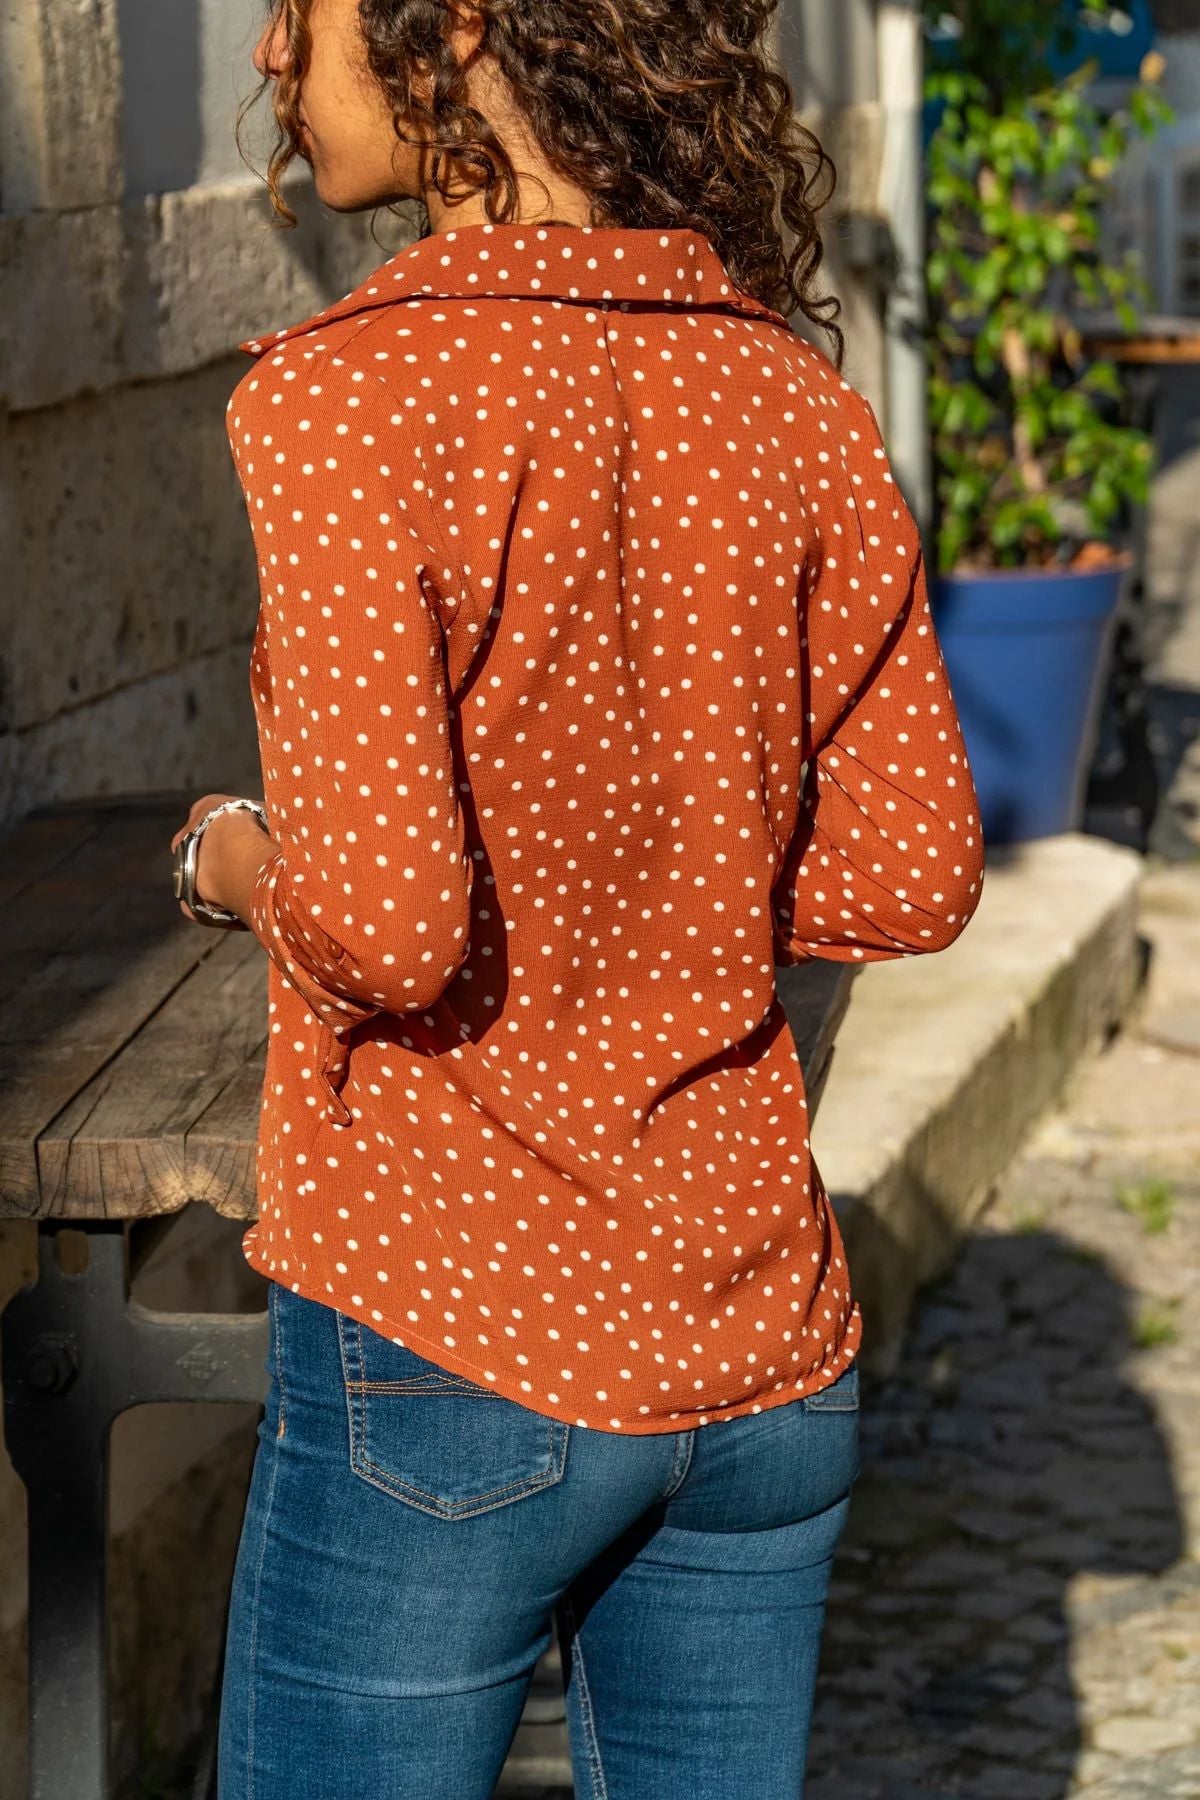 Classic Women's Shirt with Brown and White Polka Dot Design, Long Sleeve, Shirt Collar, made of 100% Polyester Fabric